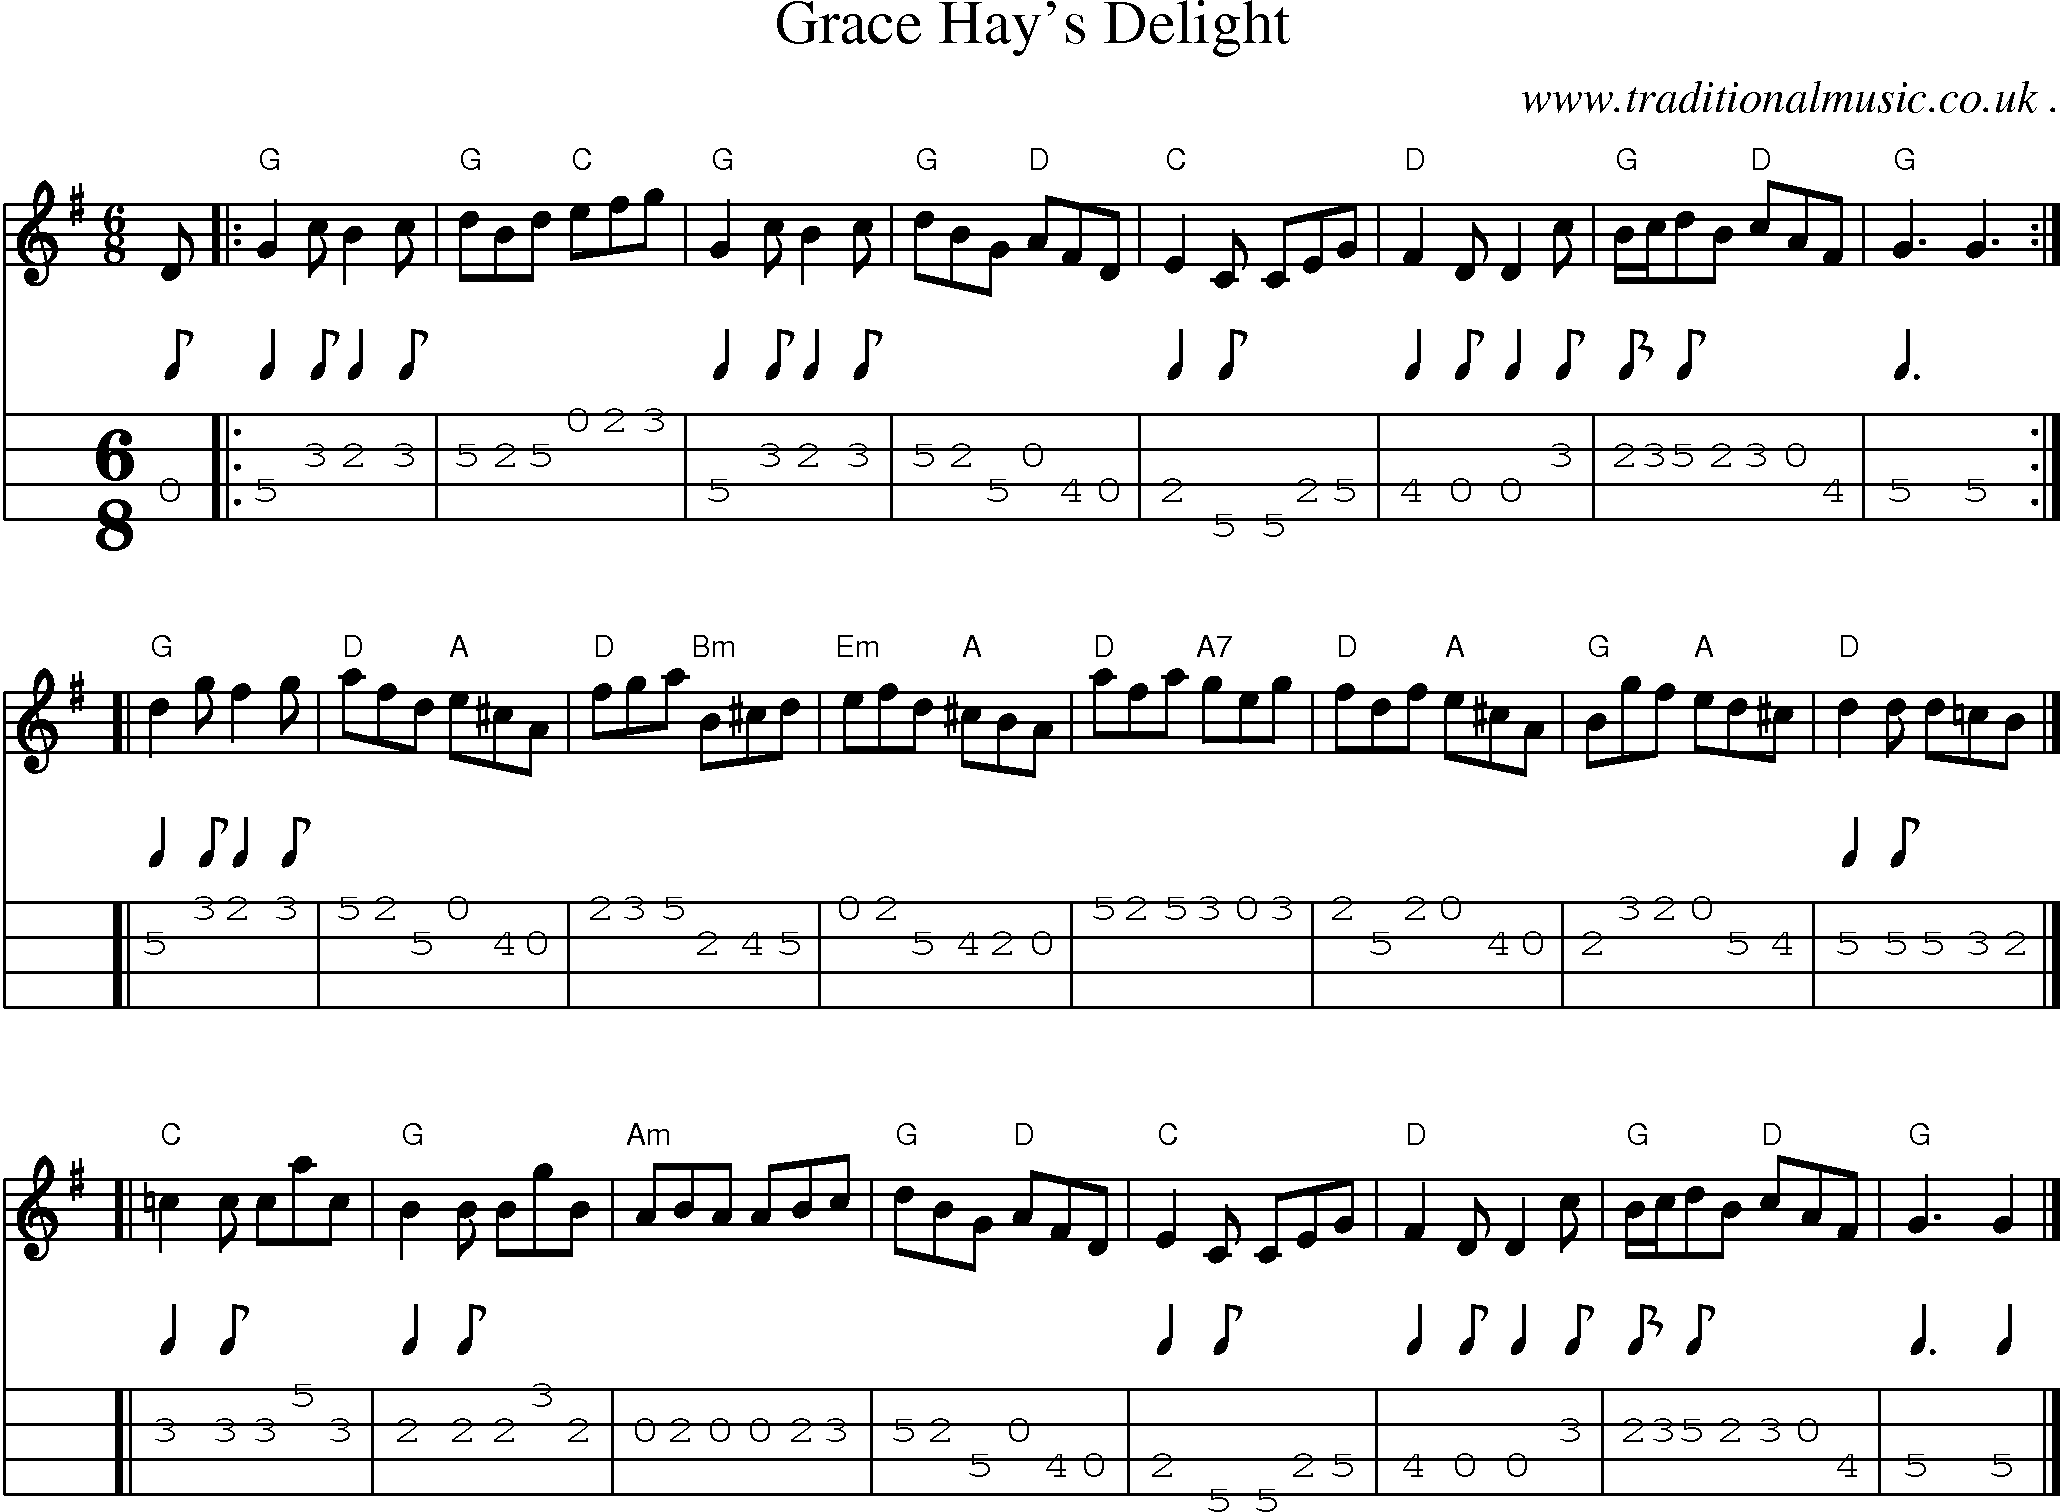 Sheet-music  score, Chords and Mandolin Tabs for Grace Hays Delight